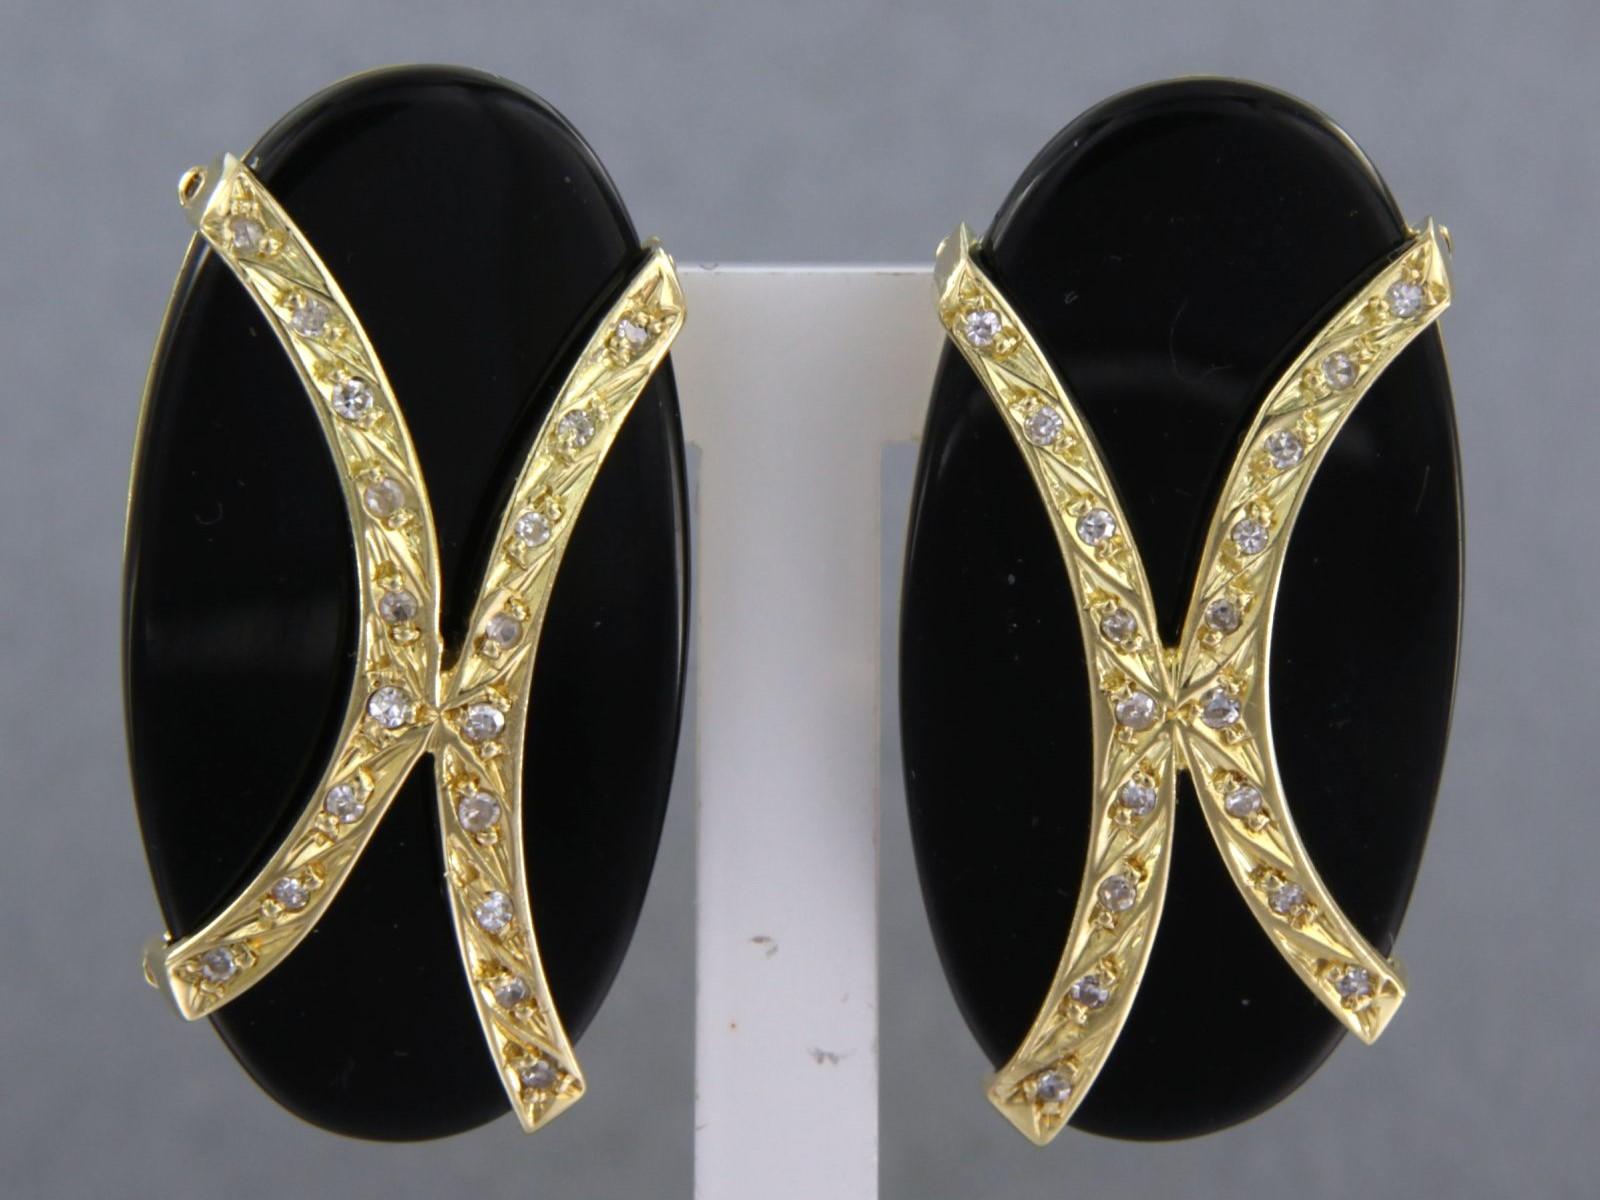 18 kt yellow gold earrings set with onyx and single cut cut diamond 0.10 ct - F/G - VS/SI

detailed description

The earrings are 3.0 cm high and 1.5 cm wide

weight: 15.4 grams

occupied with :

- 2 x 3.0 cm - 1.5 cm oval flat cut onyx

color